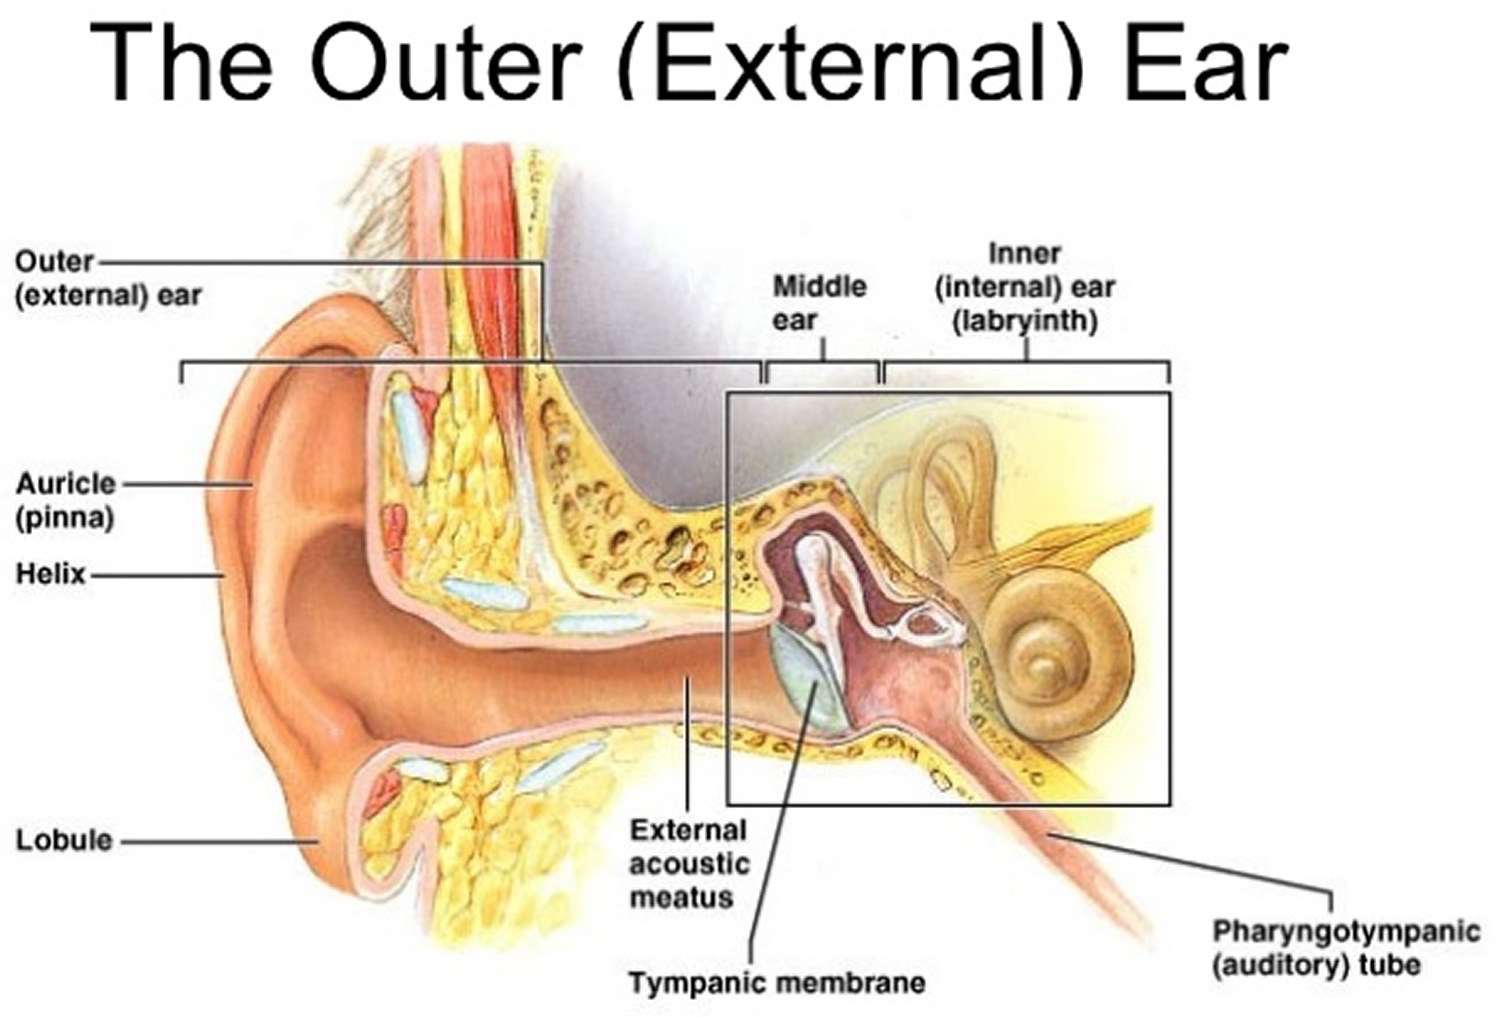 Ear Canal - Pain, Infection, Blood, Cyst, Bump